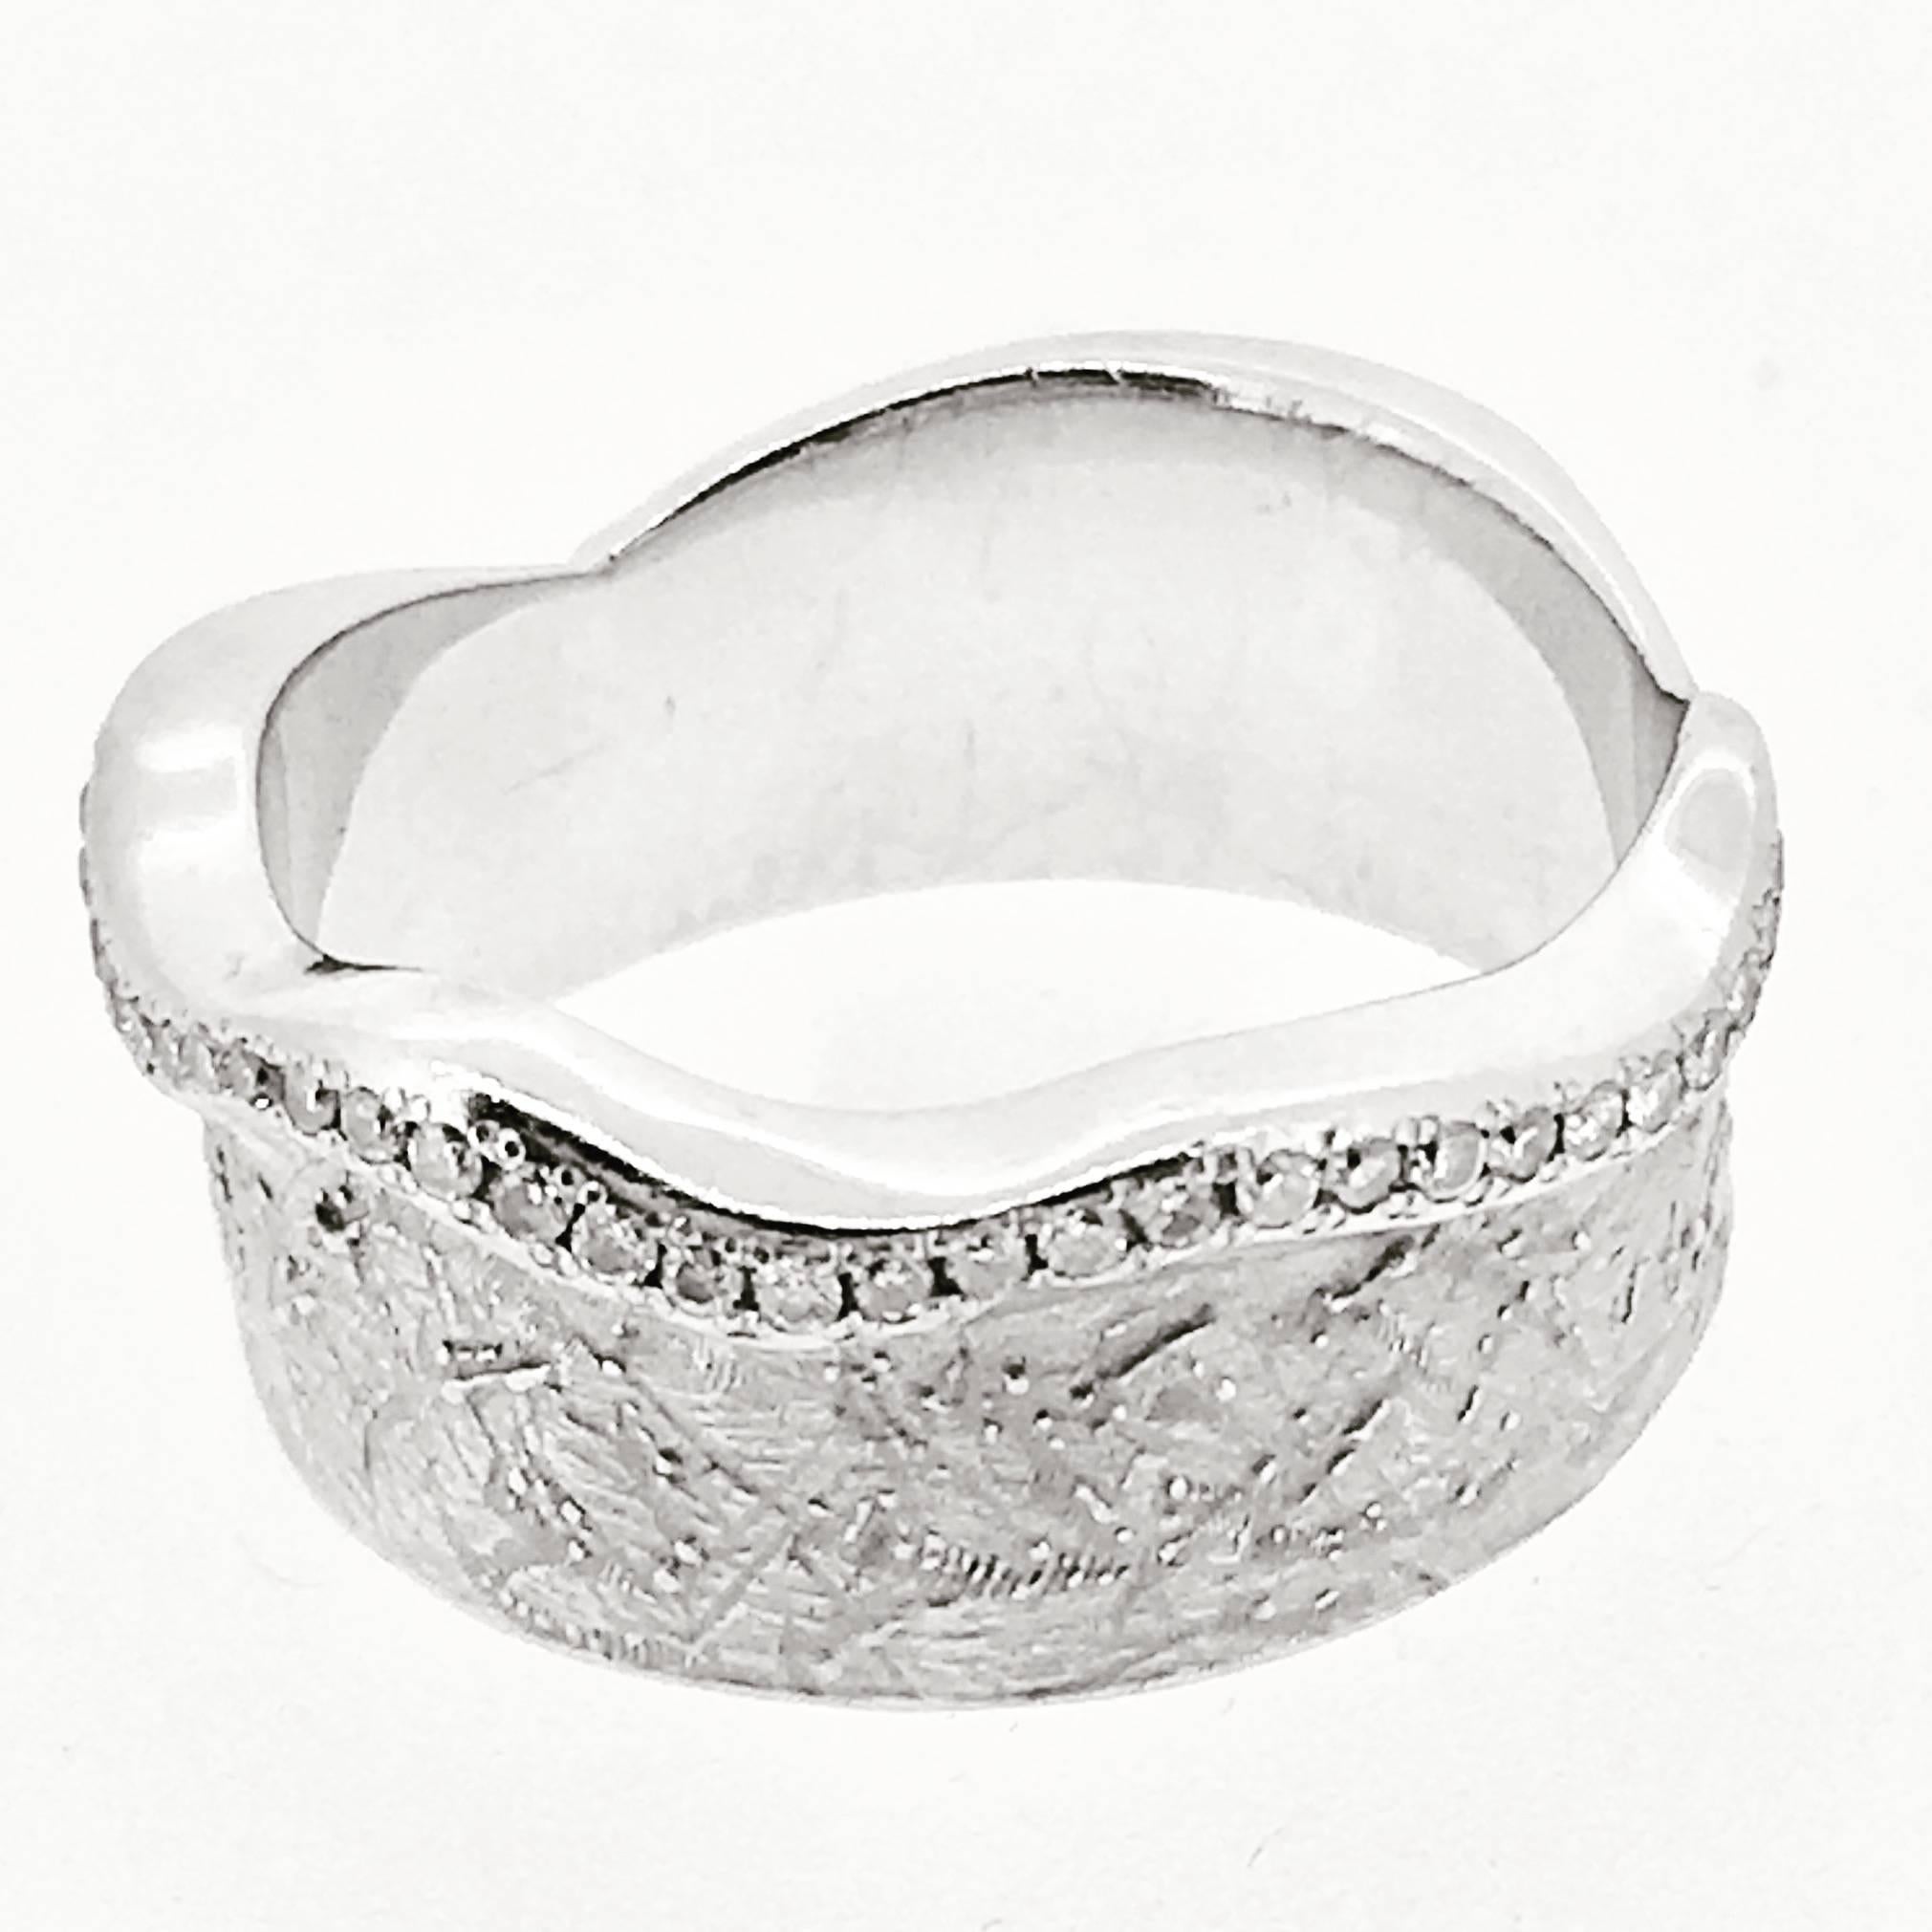 Beautifull one of a kind wedding ring , signed SVG .
Made in Belgium and can be sized to your finger . The ring is made of 9 gr Palladium White 18 ct Gold and a total of 0.28 ct diamonds.